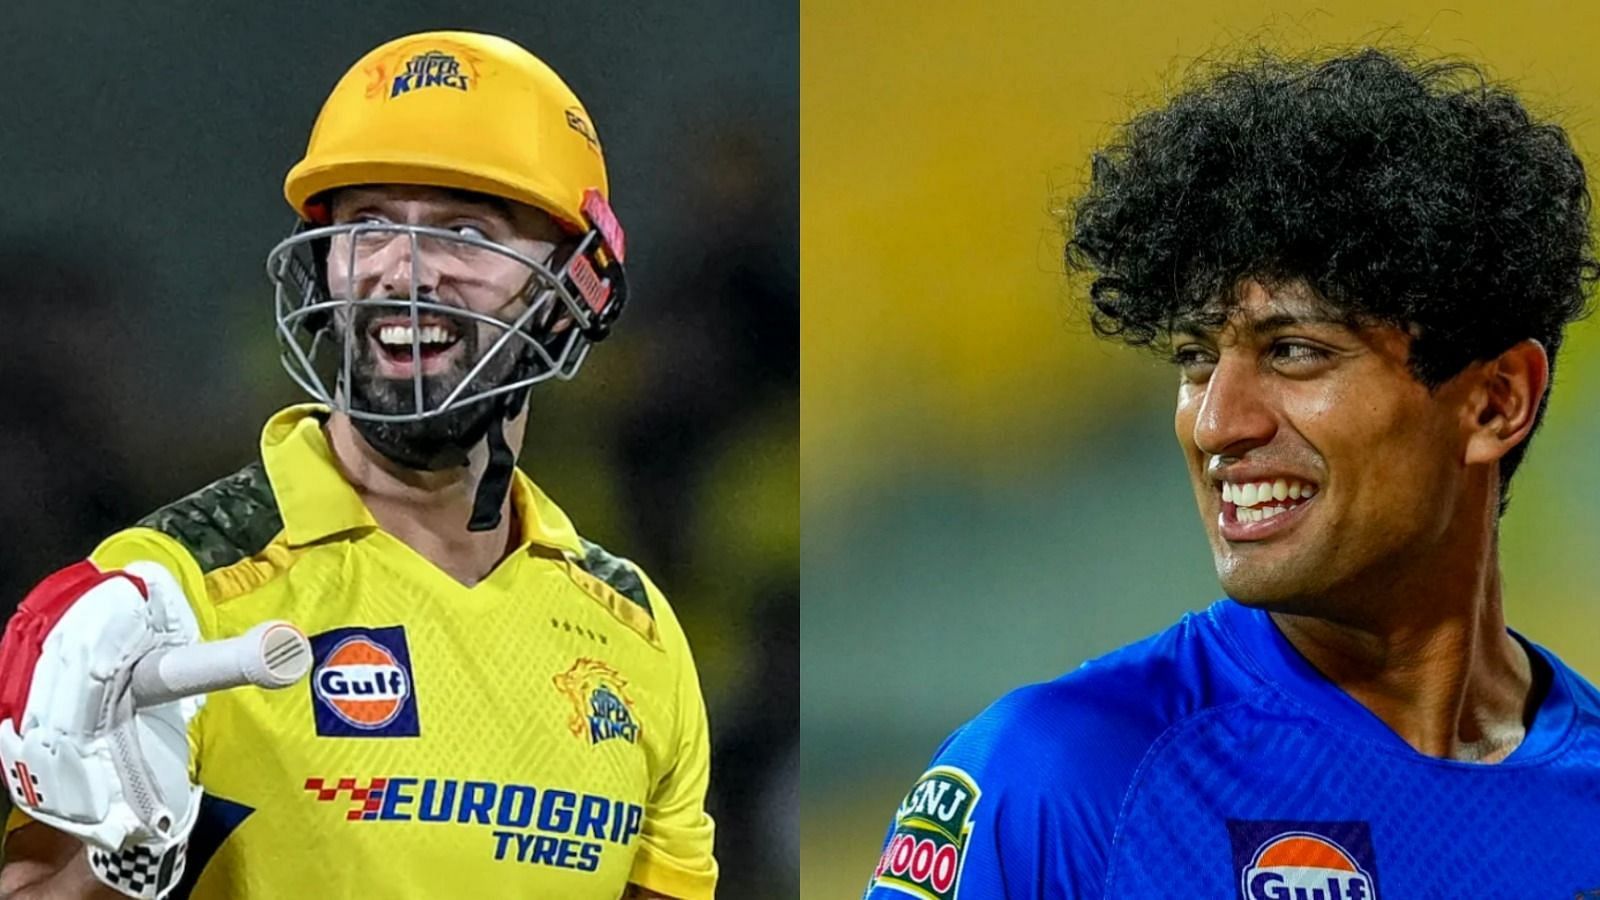 CSK faces a selection conundrum between Mitchell and Ravindra ahead of SRH clash (Image: BCCI/IPL)